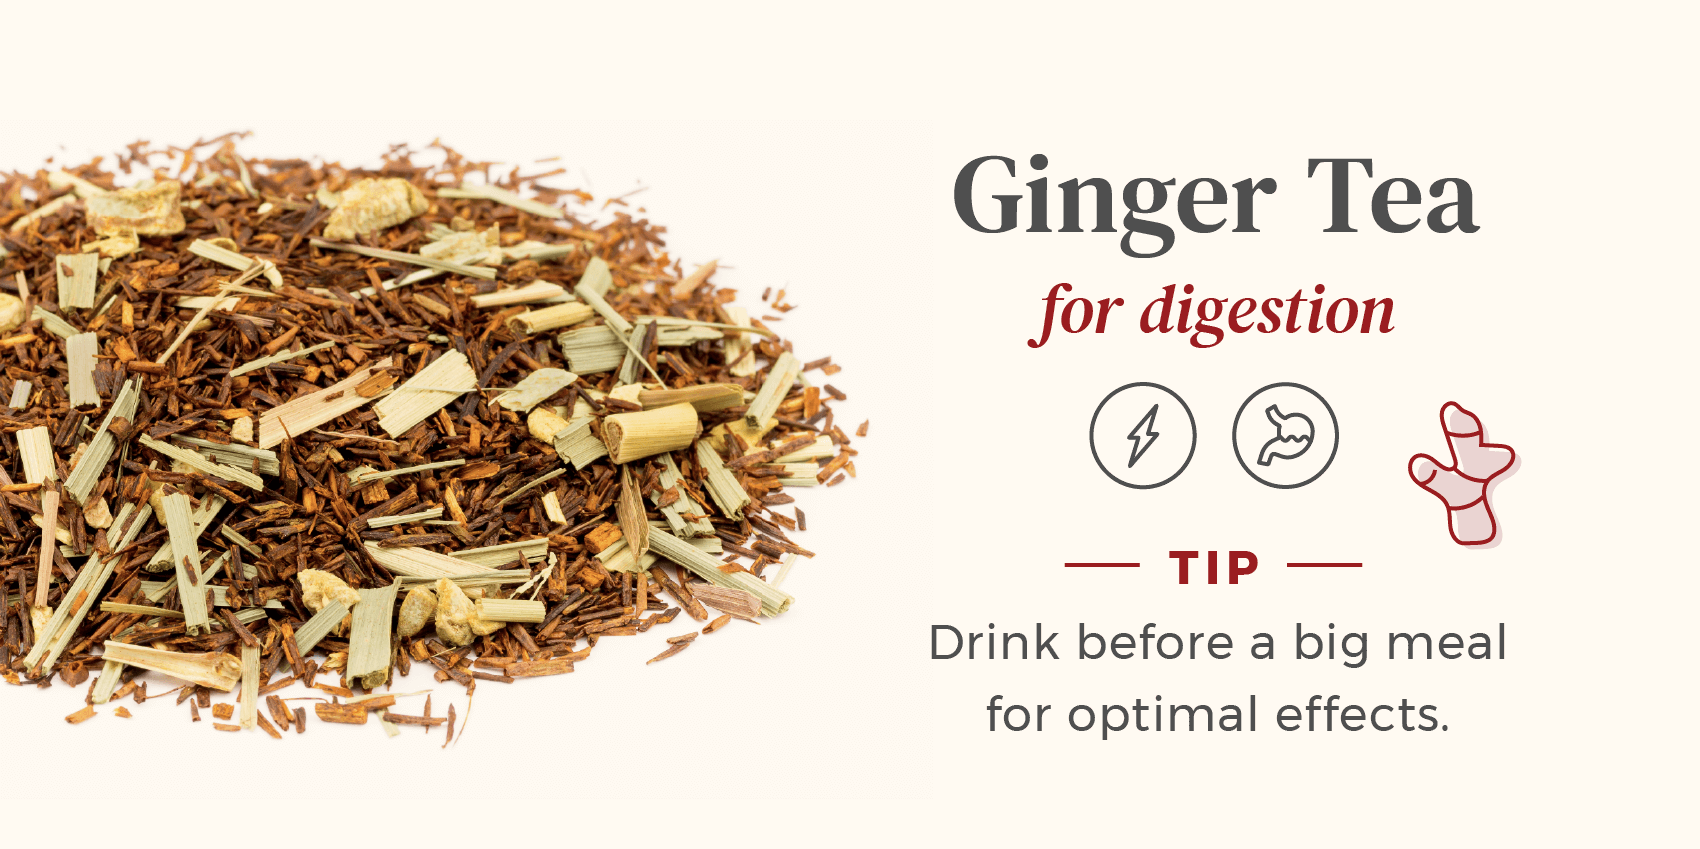 Pile of loose ginger tea used for sleep, drink before a meal for best effects.